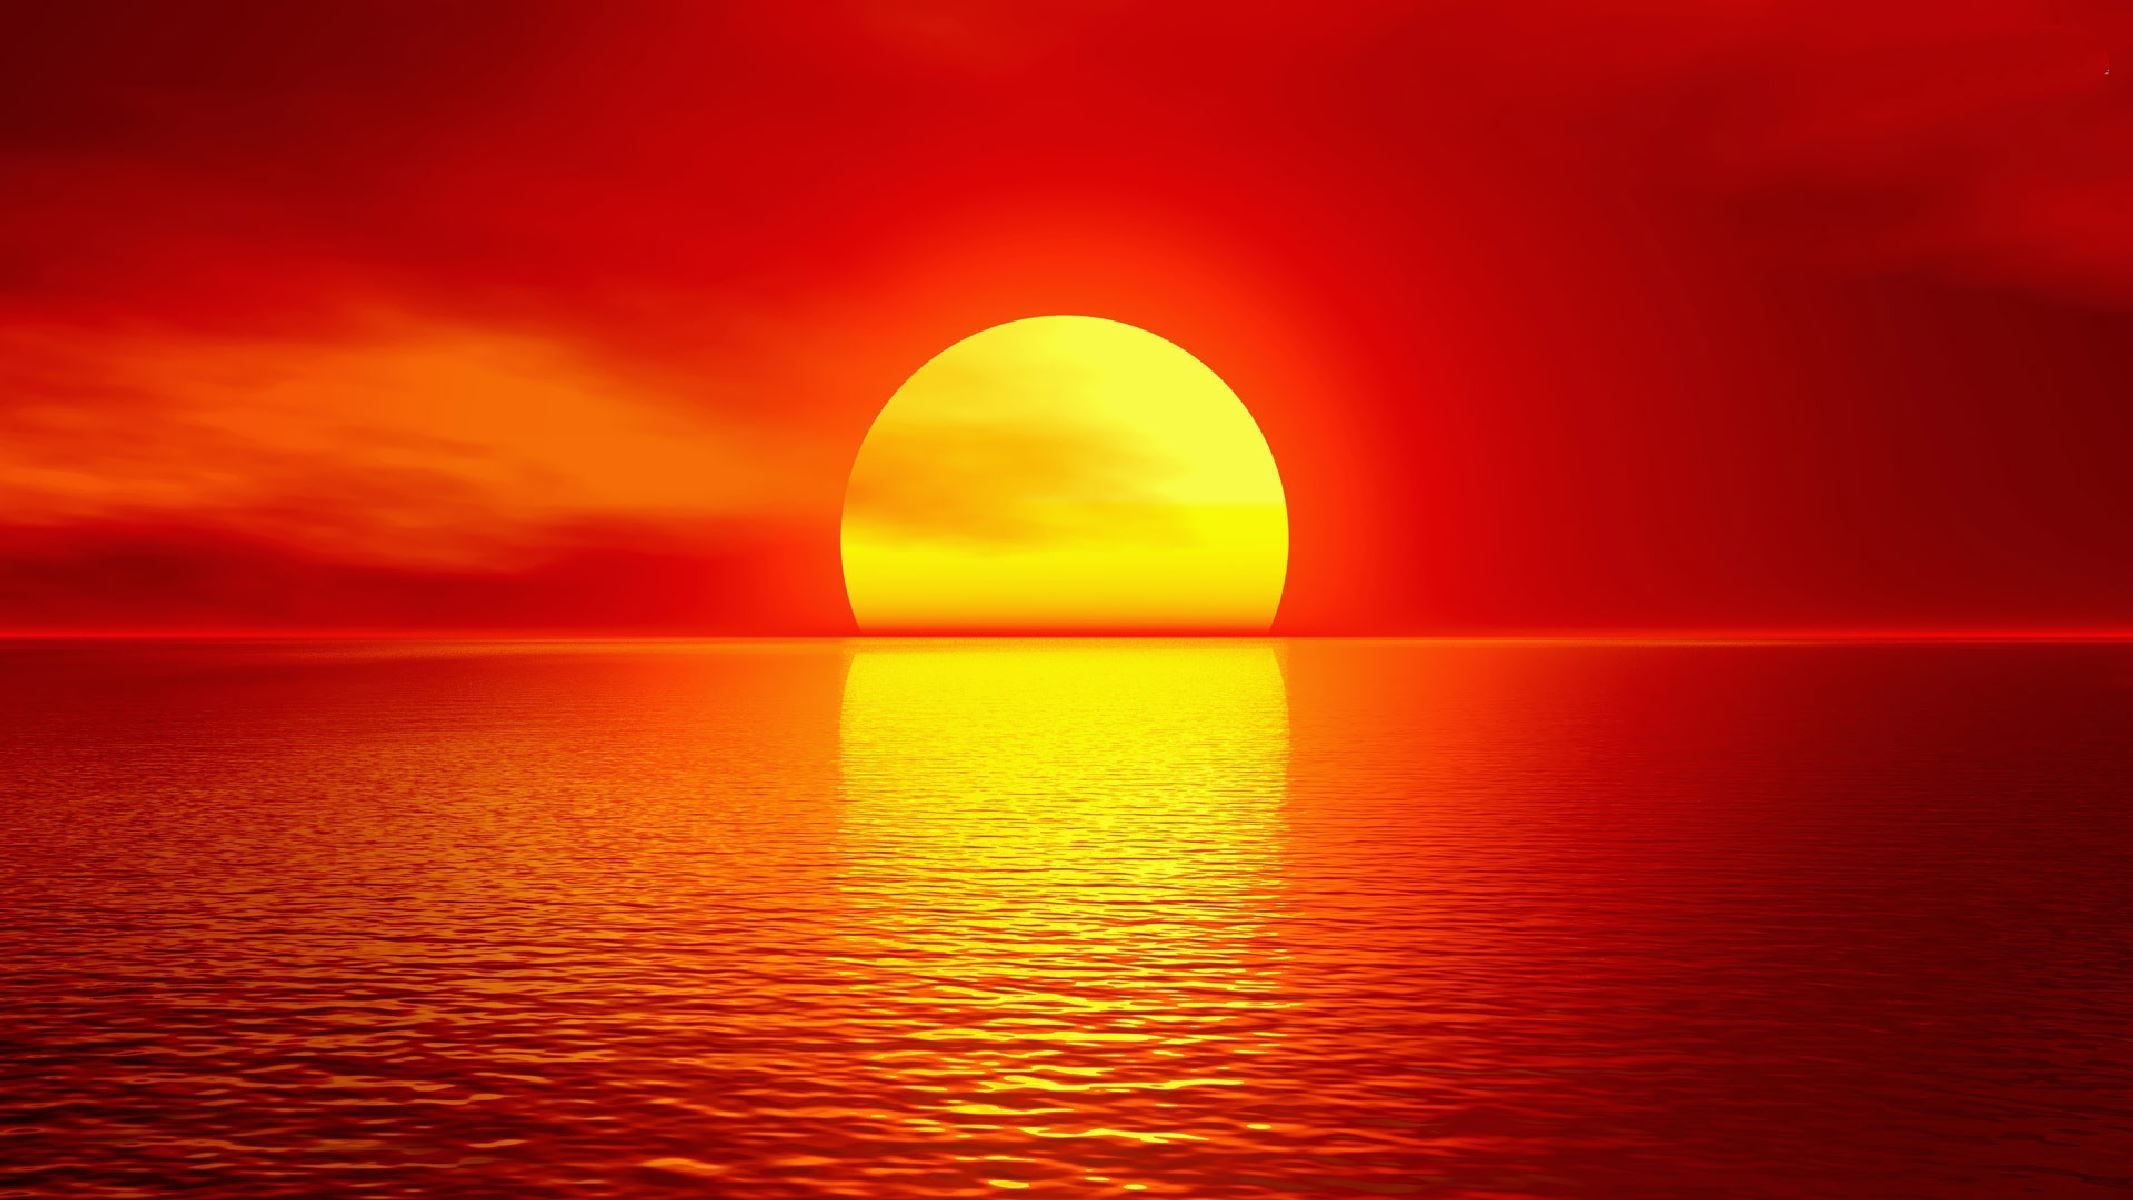 Amazing red sunset wallpaper HD free download